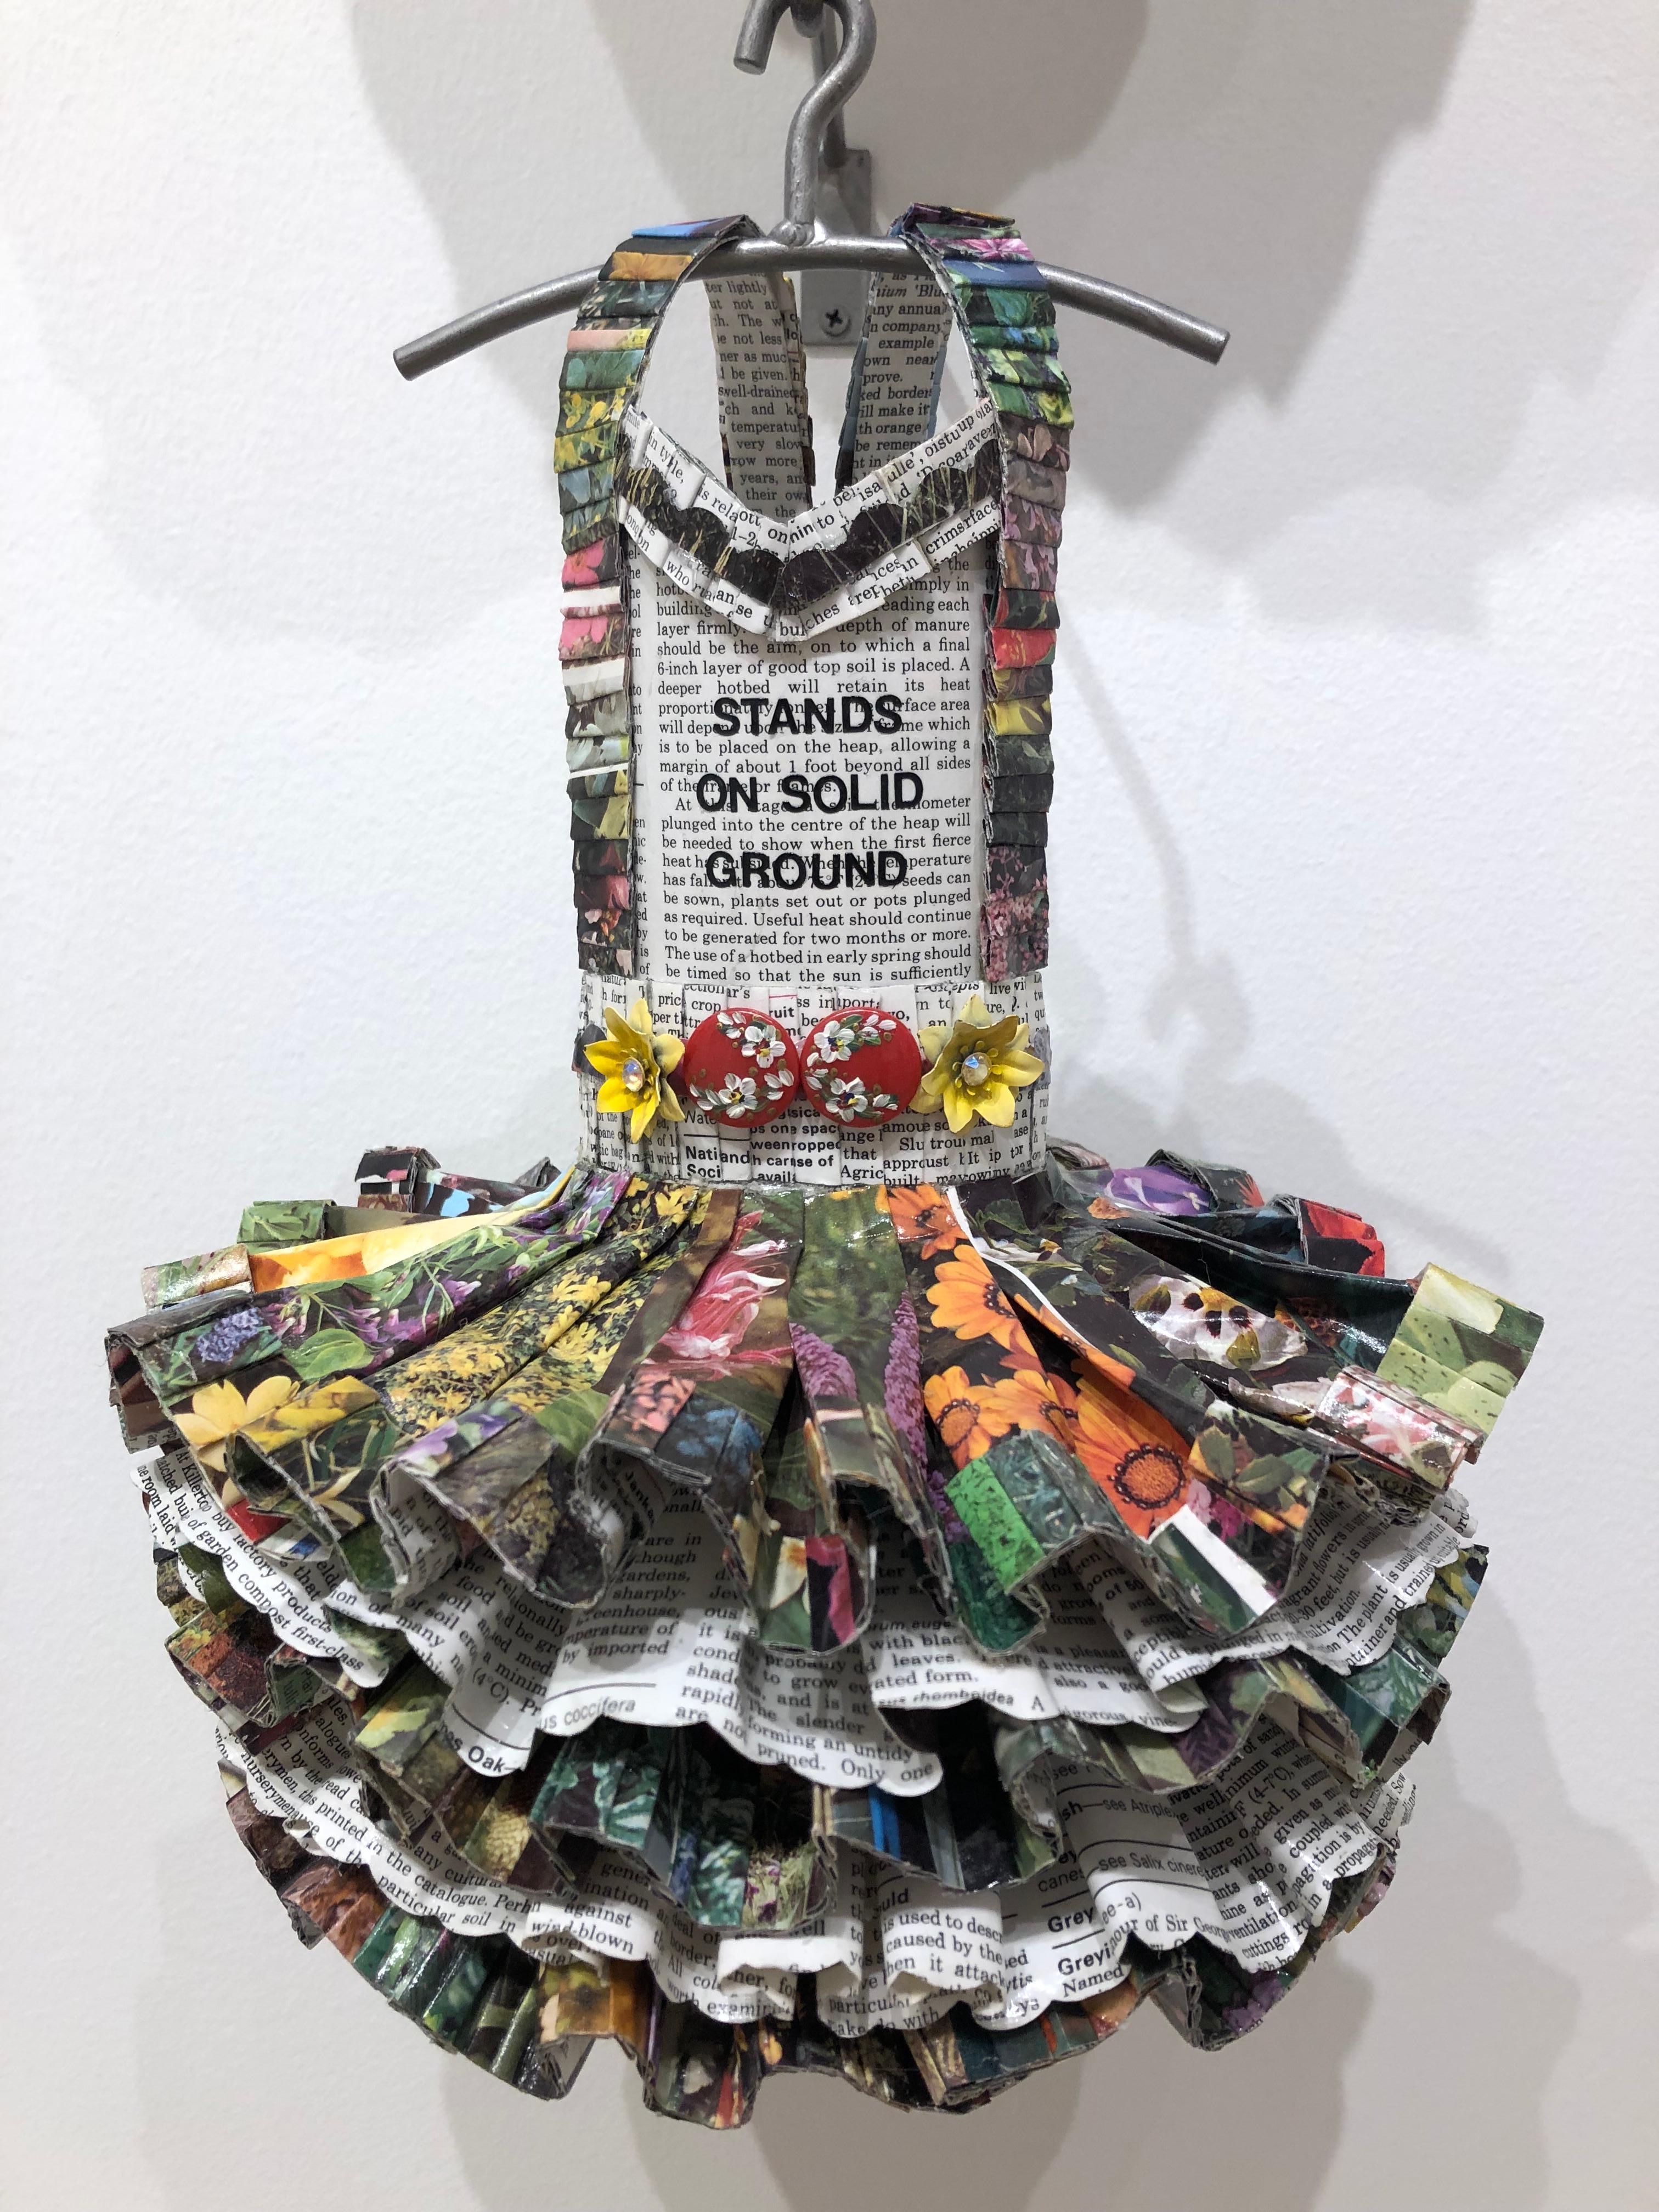 Dress Sculpture, flower papers, Stands on Solid Ground - Other Art Style Mixed Media Art by Donna Rosenthal